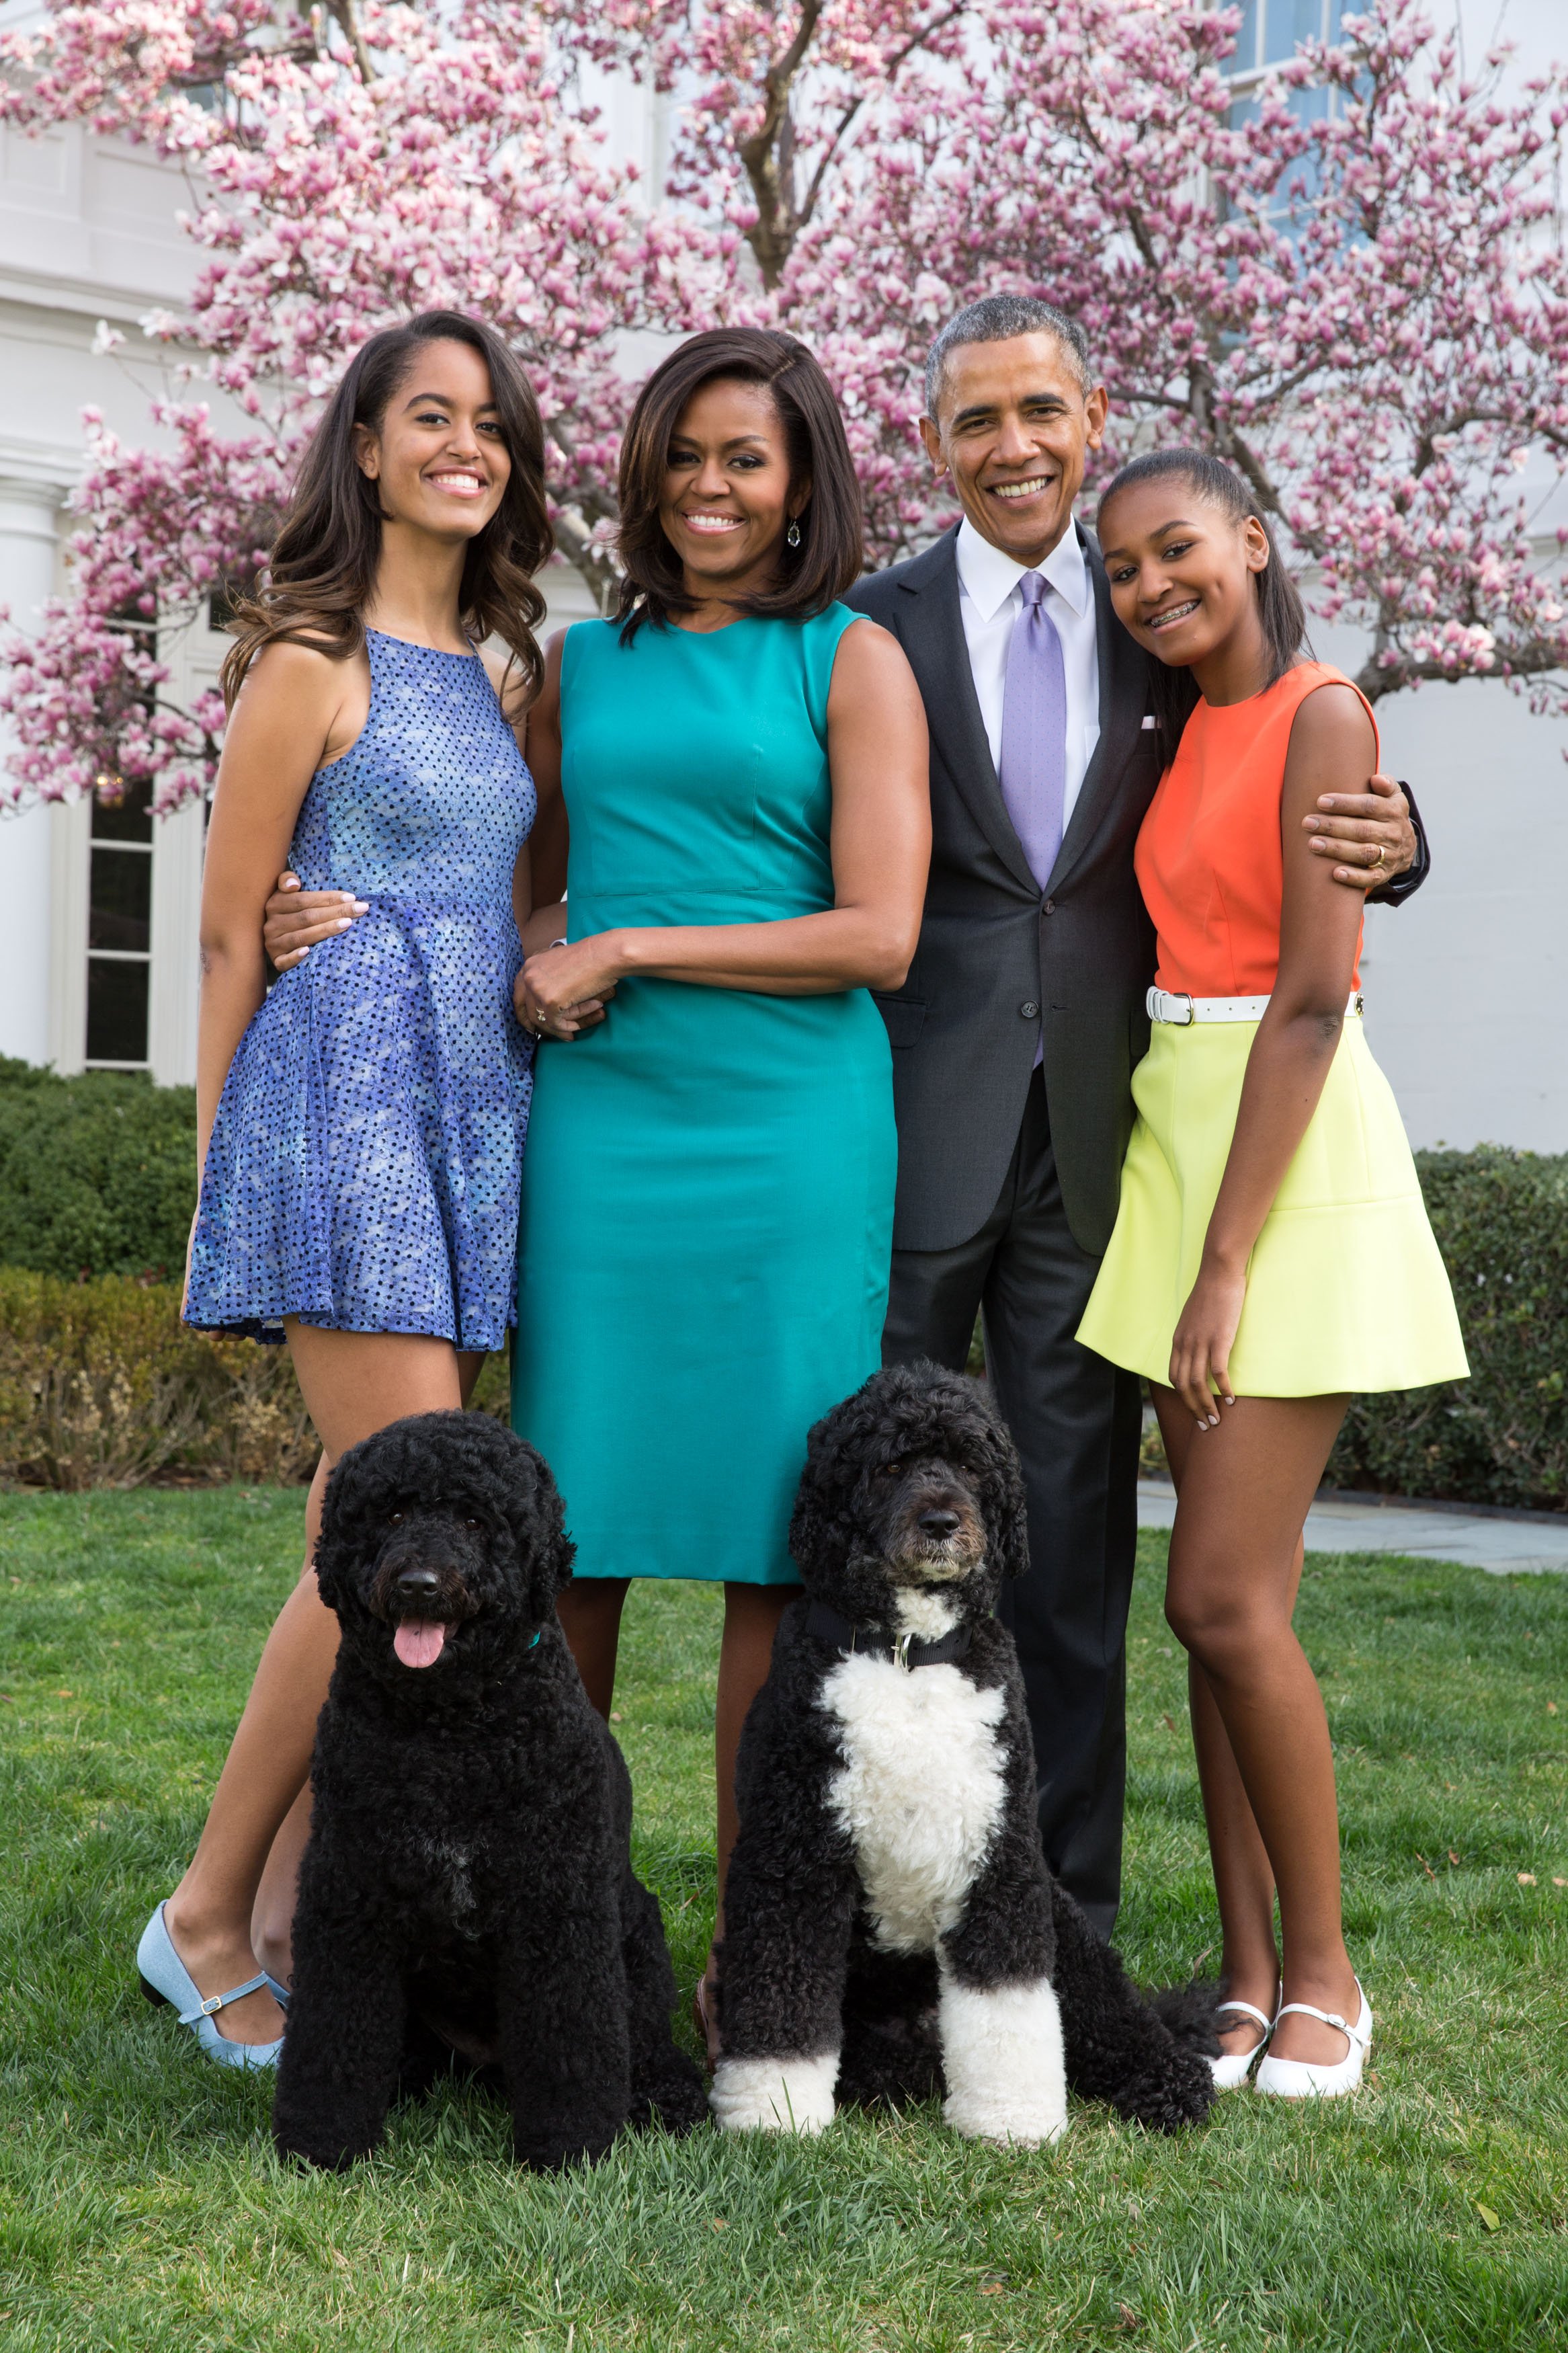 Former U.S. President Barack Obama, Michelle Obama with Malia and Sasha in the Rose Garden of the White House, in Washington, DC. | Photo: Getty Images.